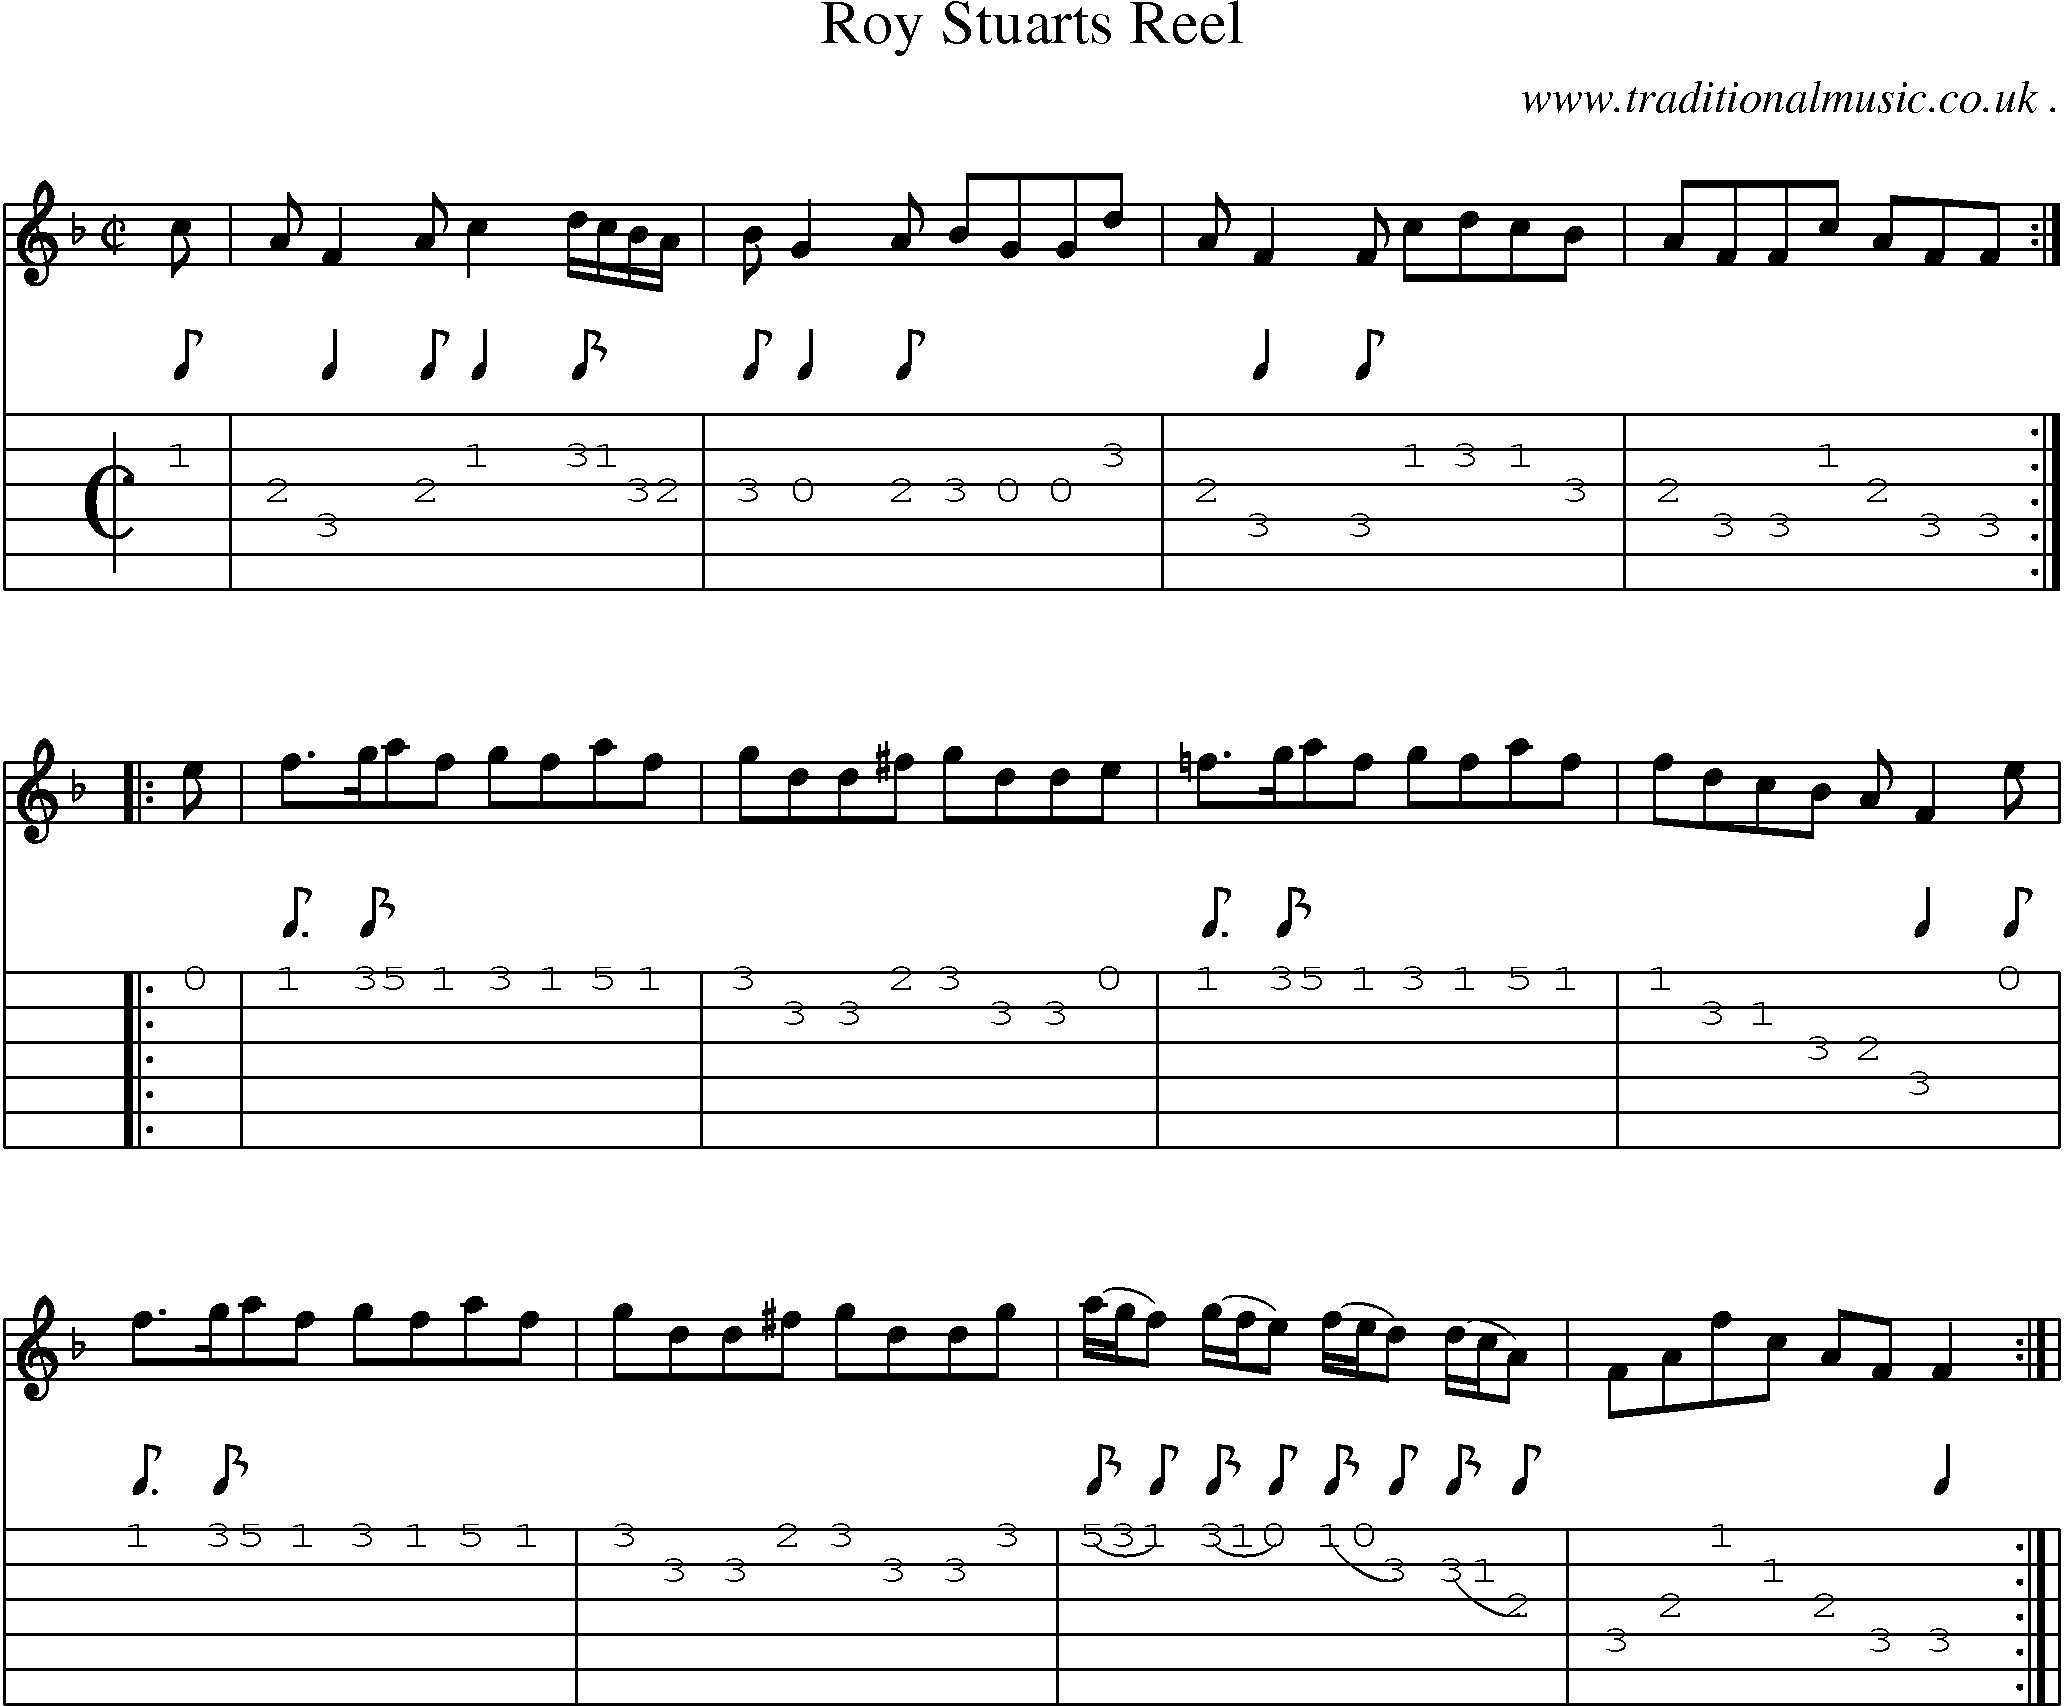 Sheet-Music and Guitar Tabs for Roy Stuarts Reel